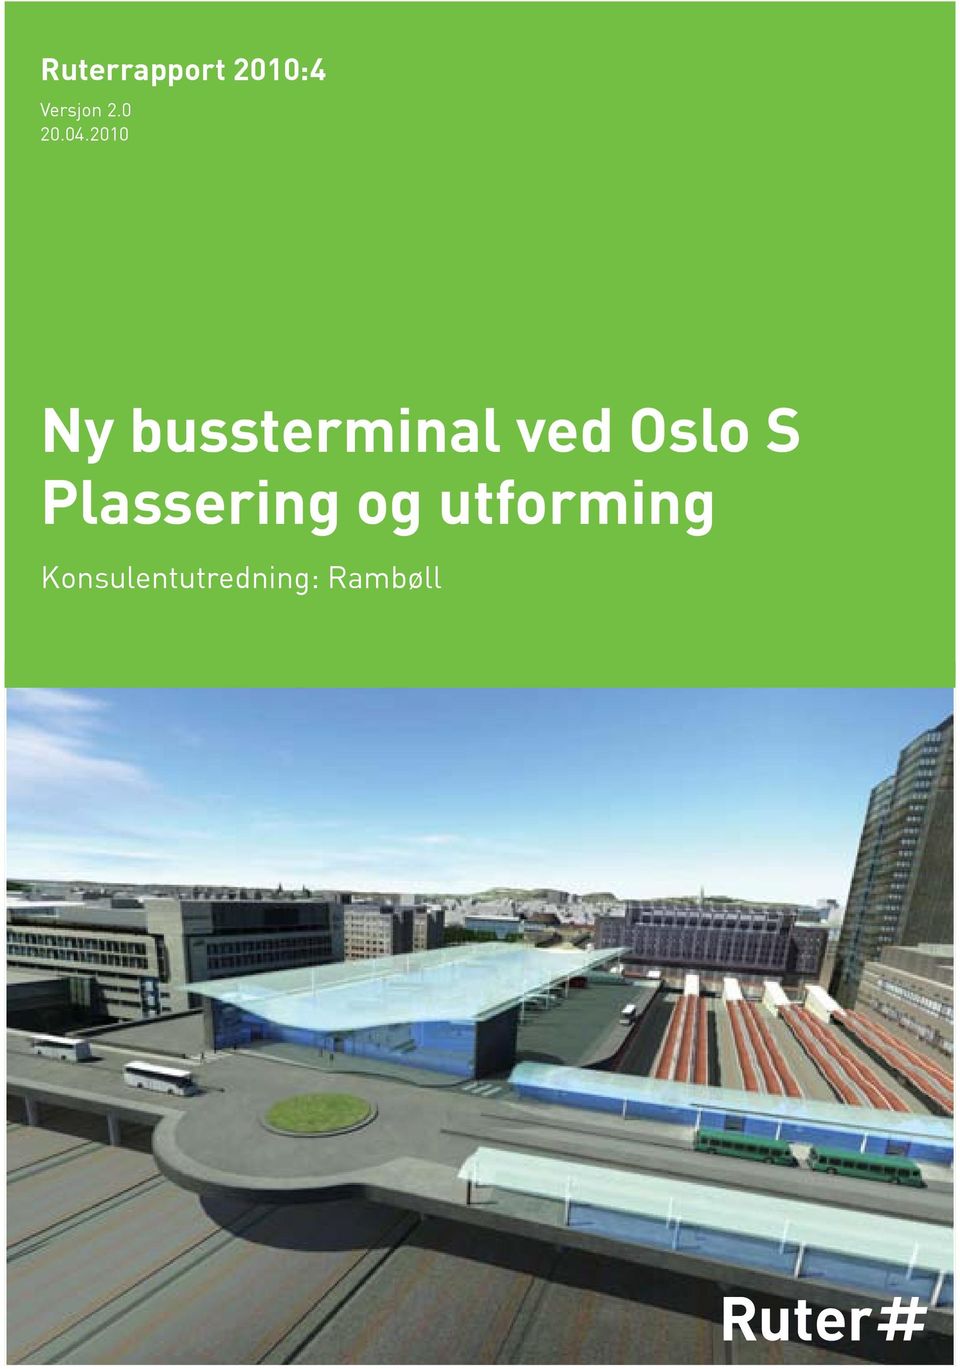 2010 Ny bussterminal ved Oslo